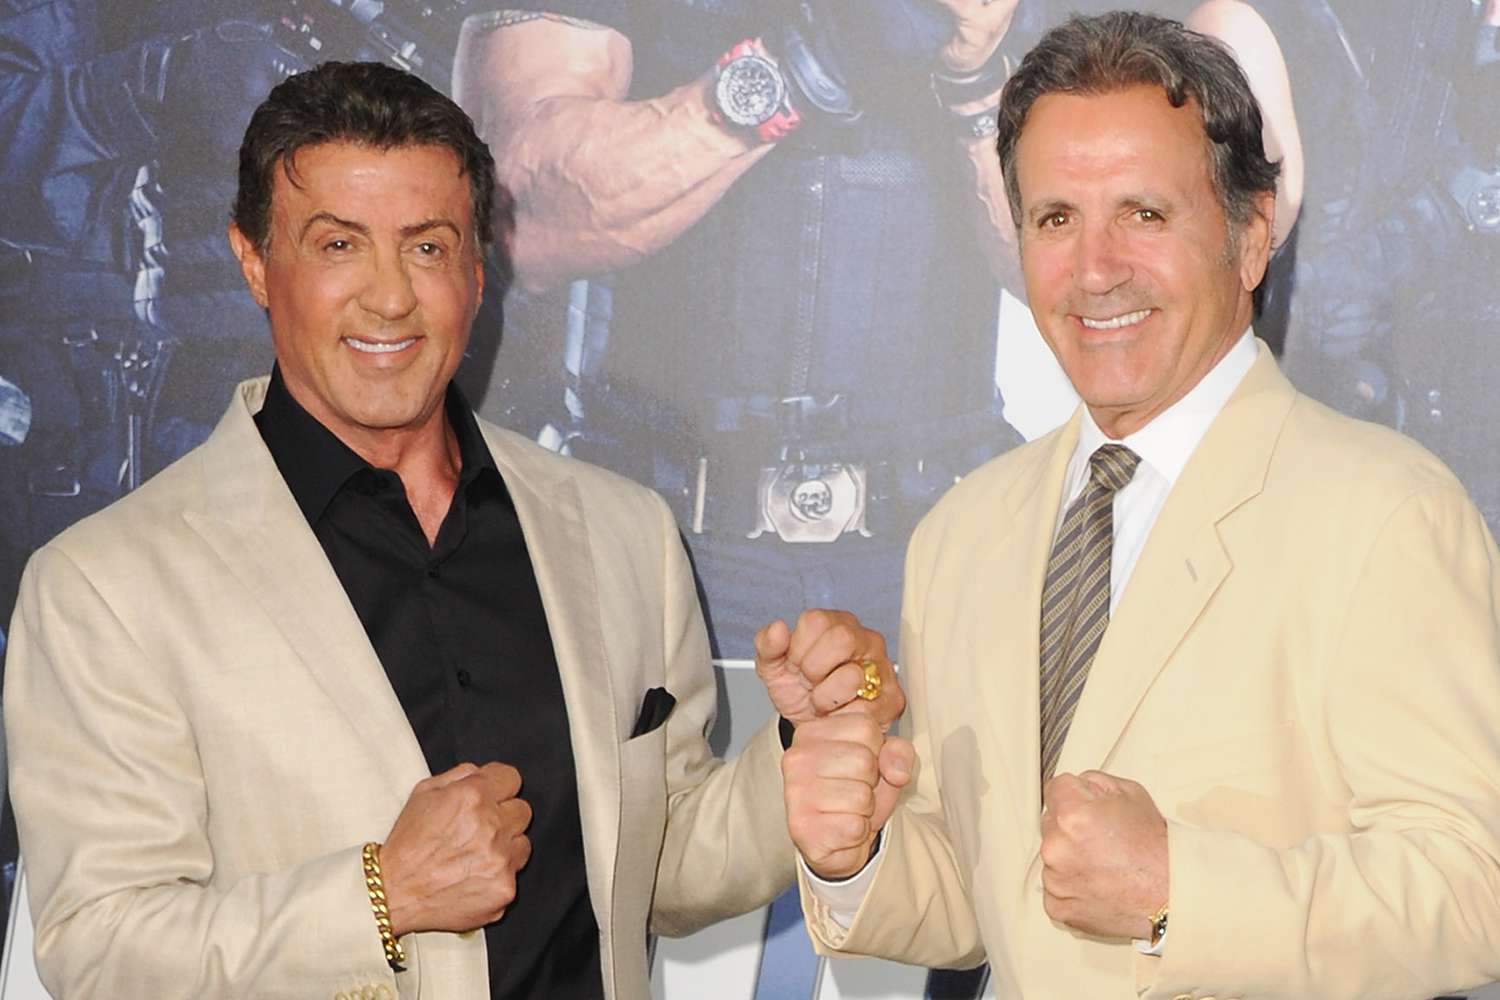 Who Is Frank Stallone?